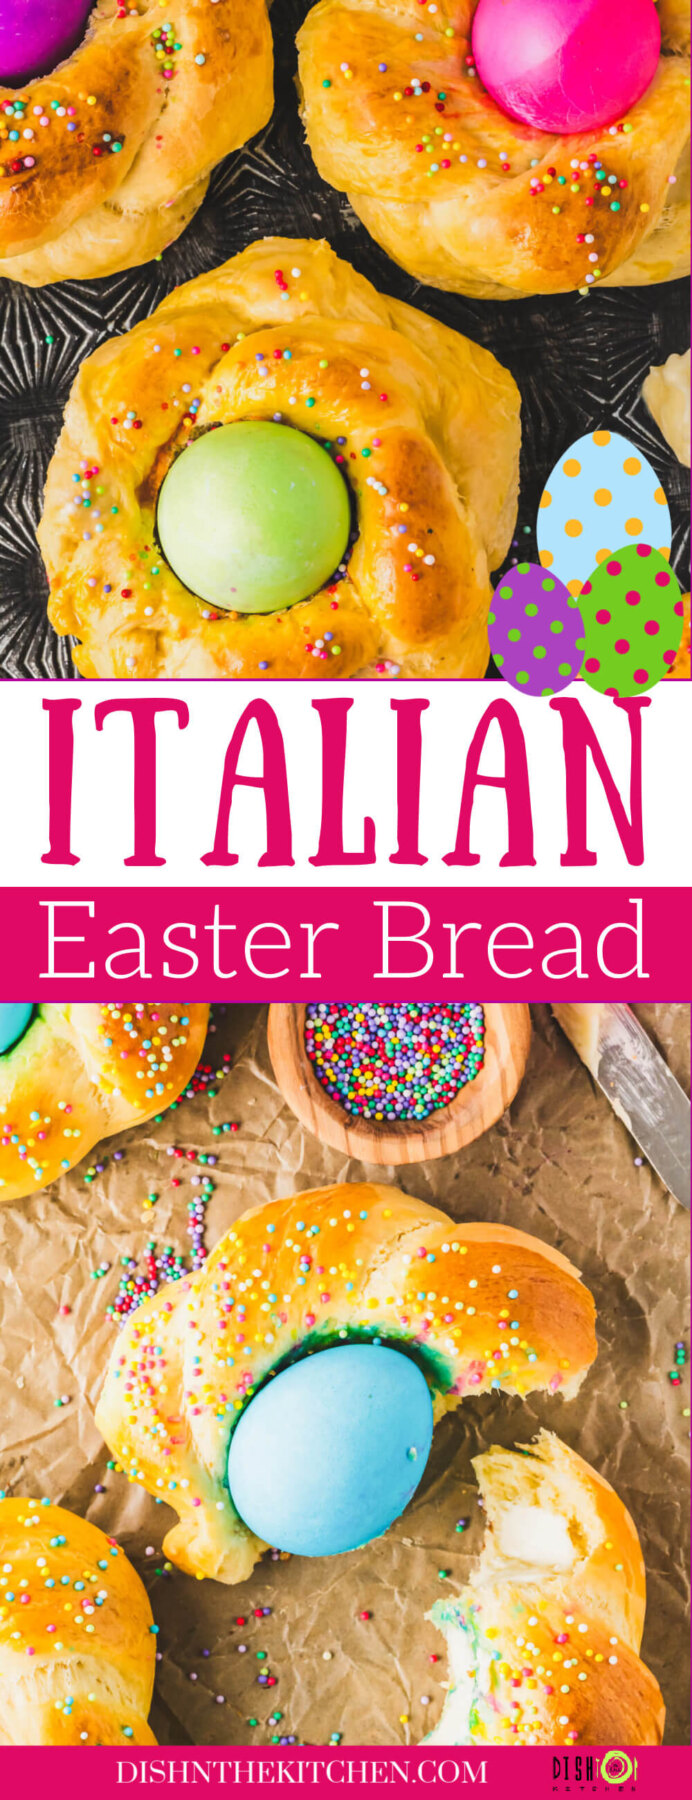 Pinterest image featuring a group of golden baked Italian Easter Bread filled with brightly coloured Easter eggs on a baking sheet.